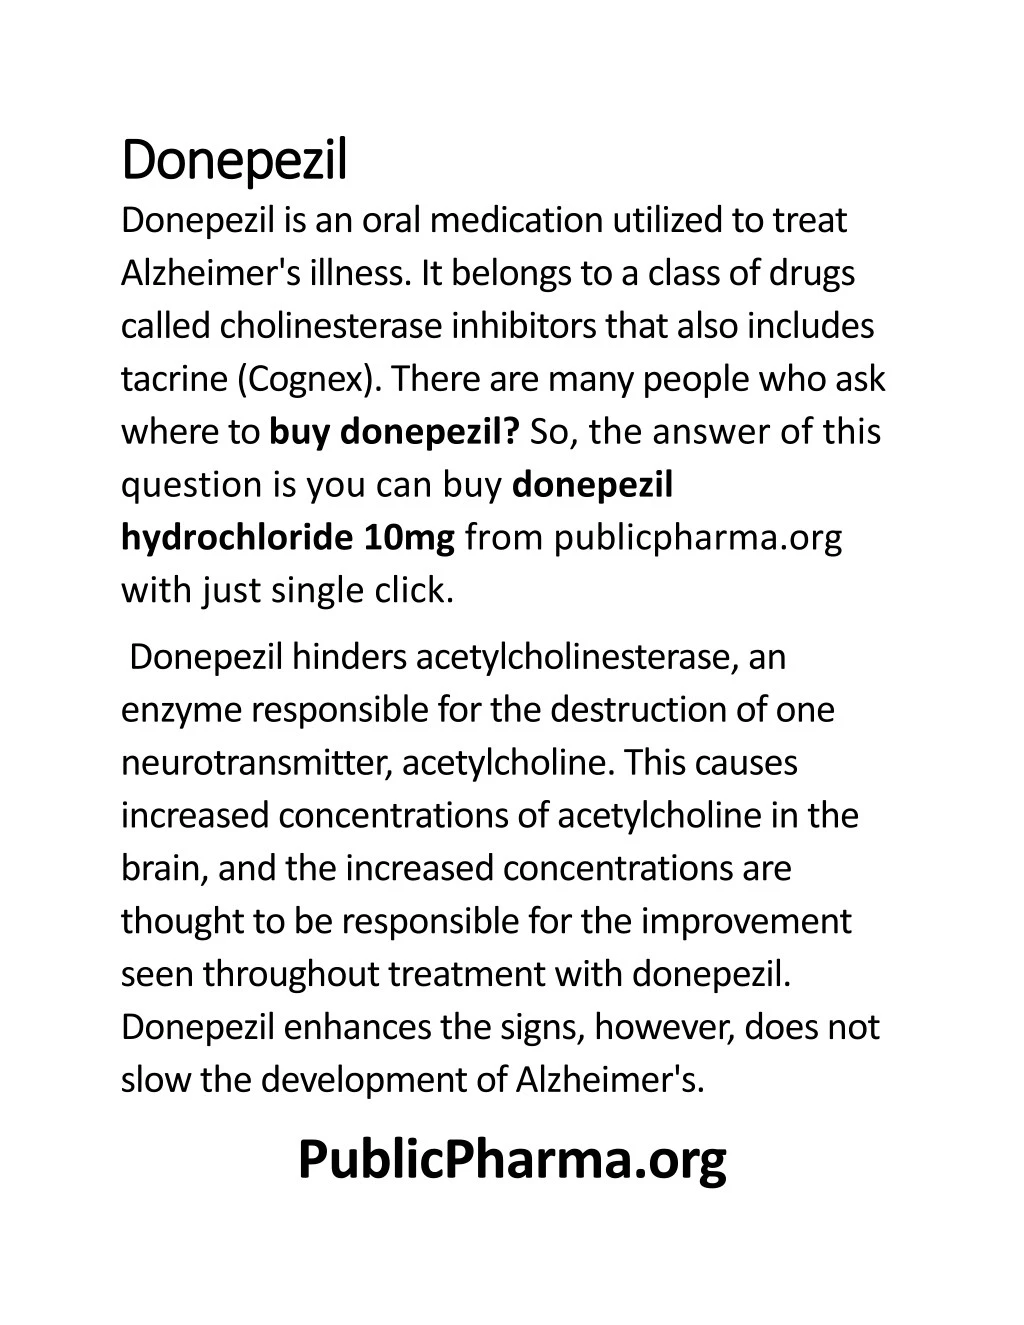 donepezil donepezil donepezil is an oral